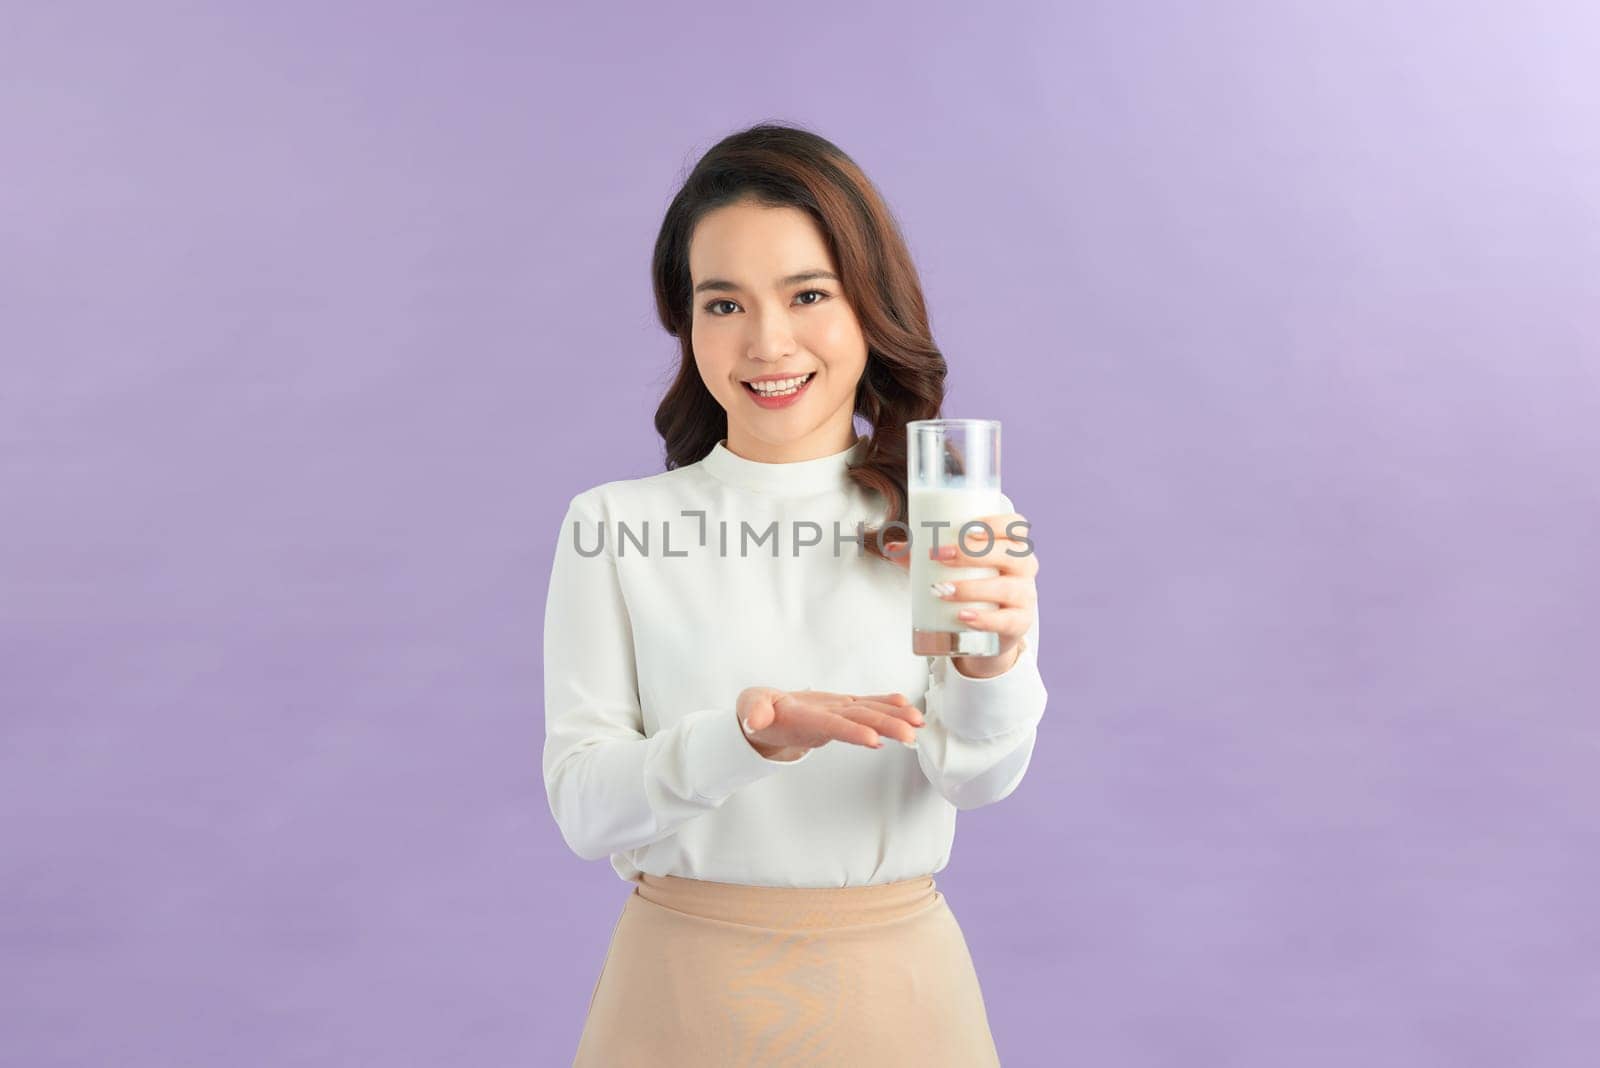 Laughing young woman with a glass of milk